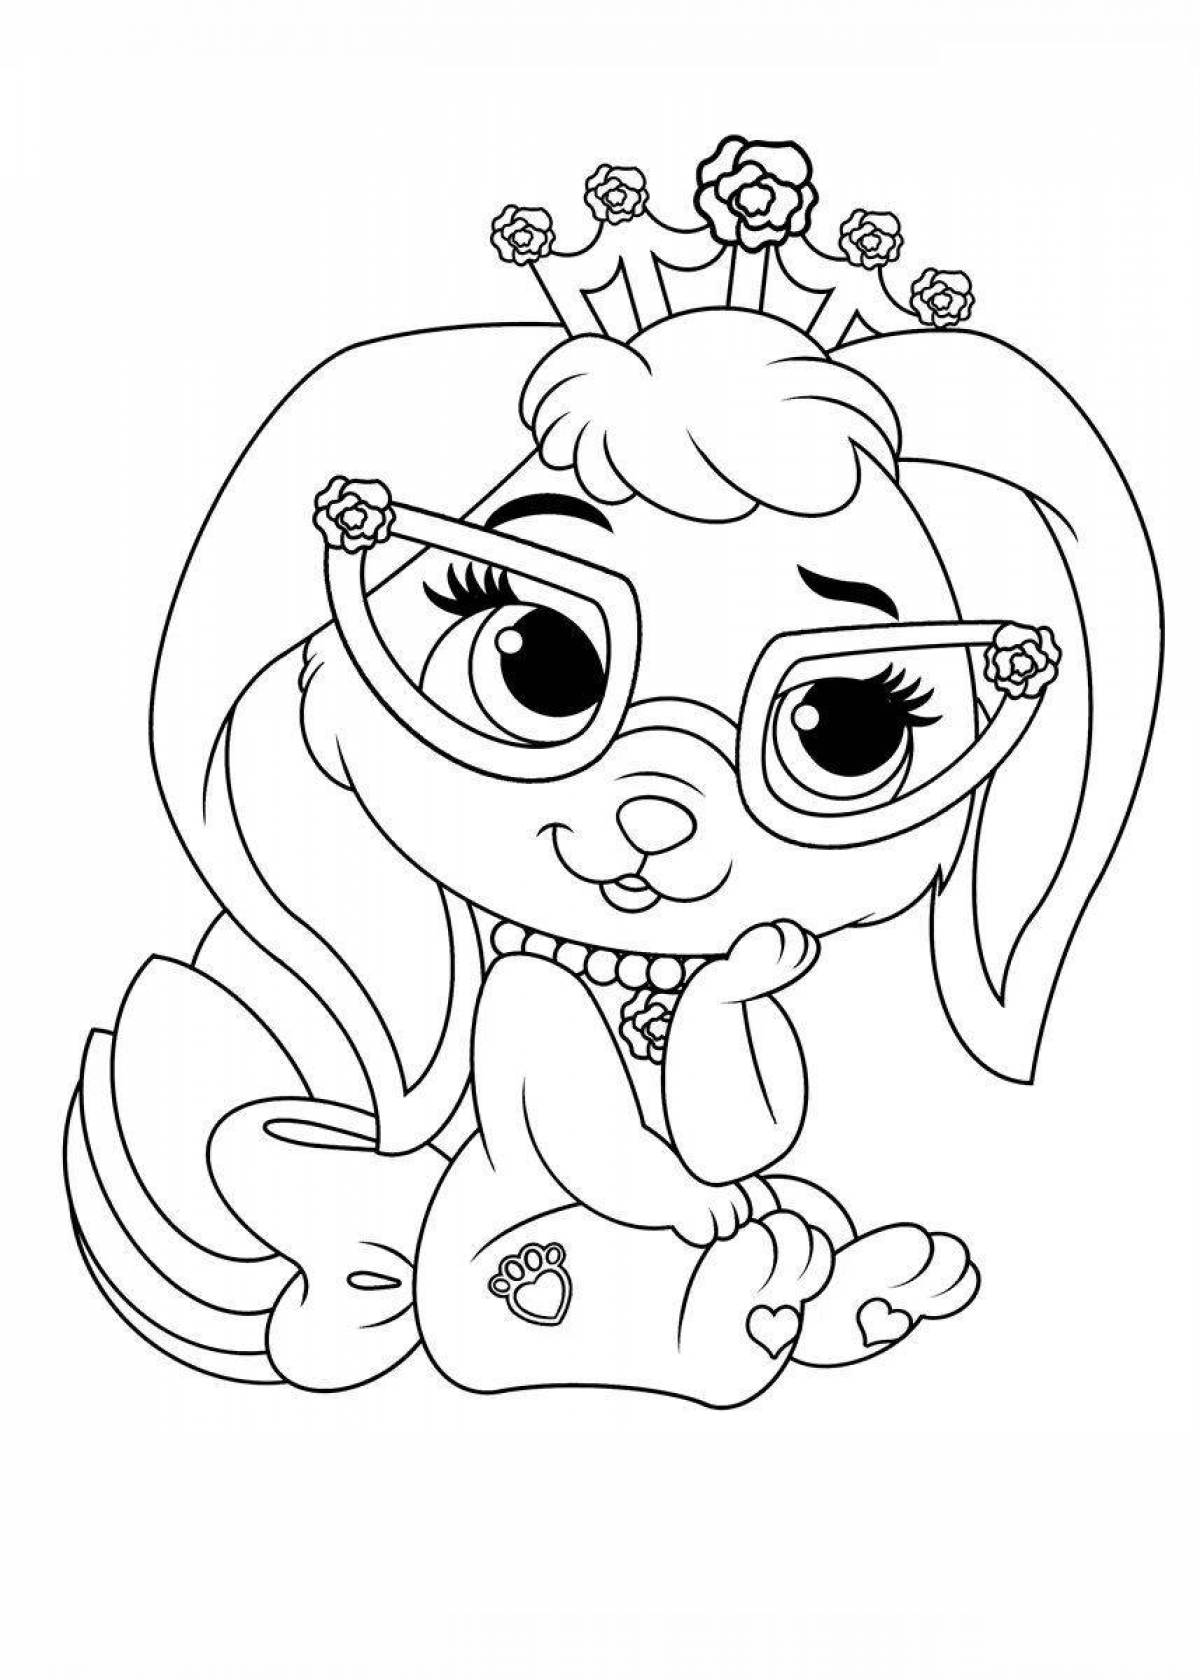 Vip pets dogs animated coloring pages